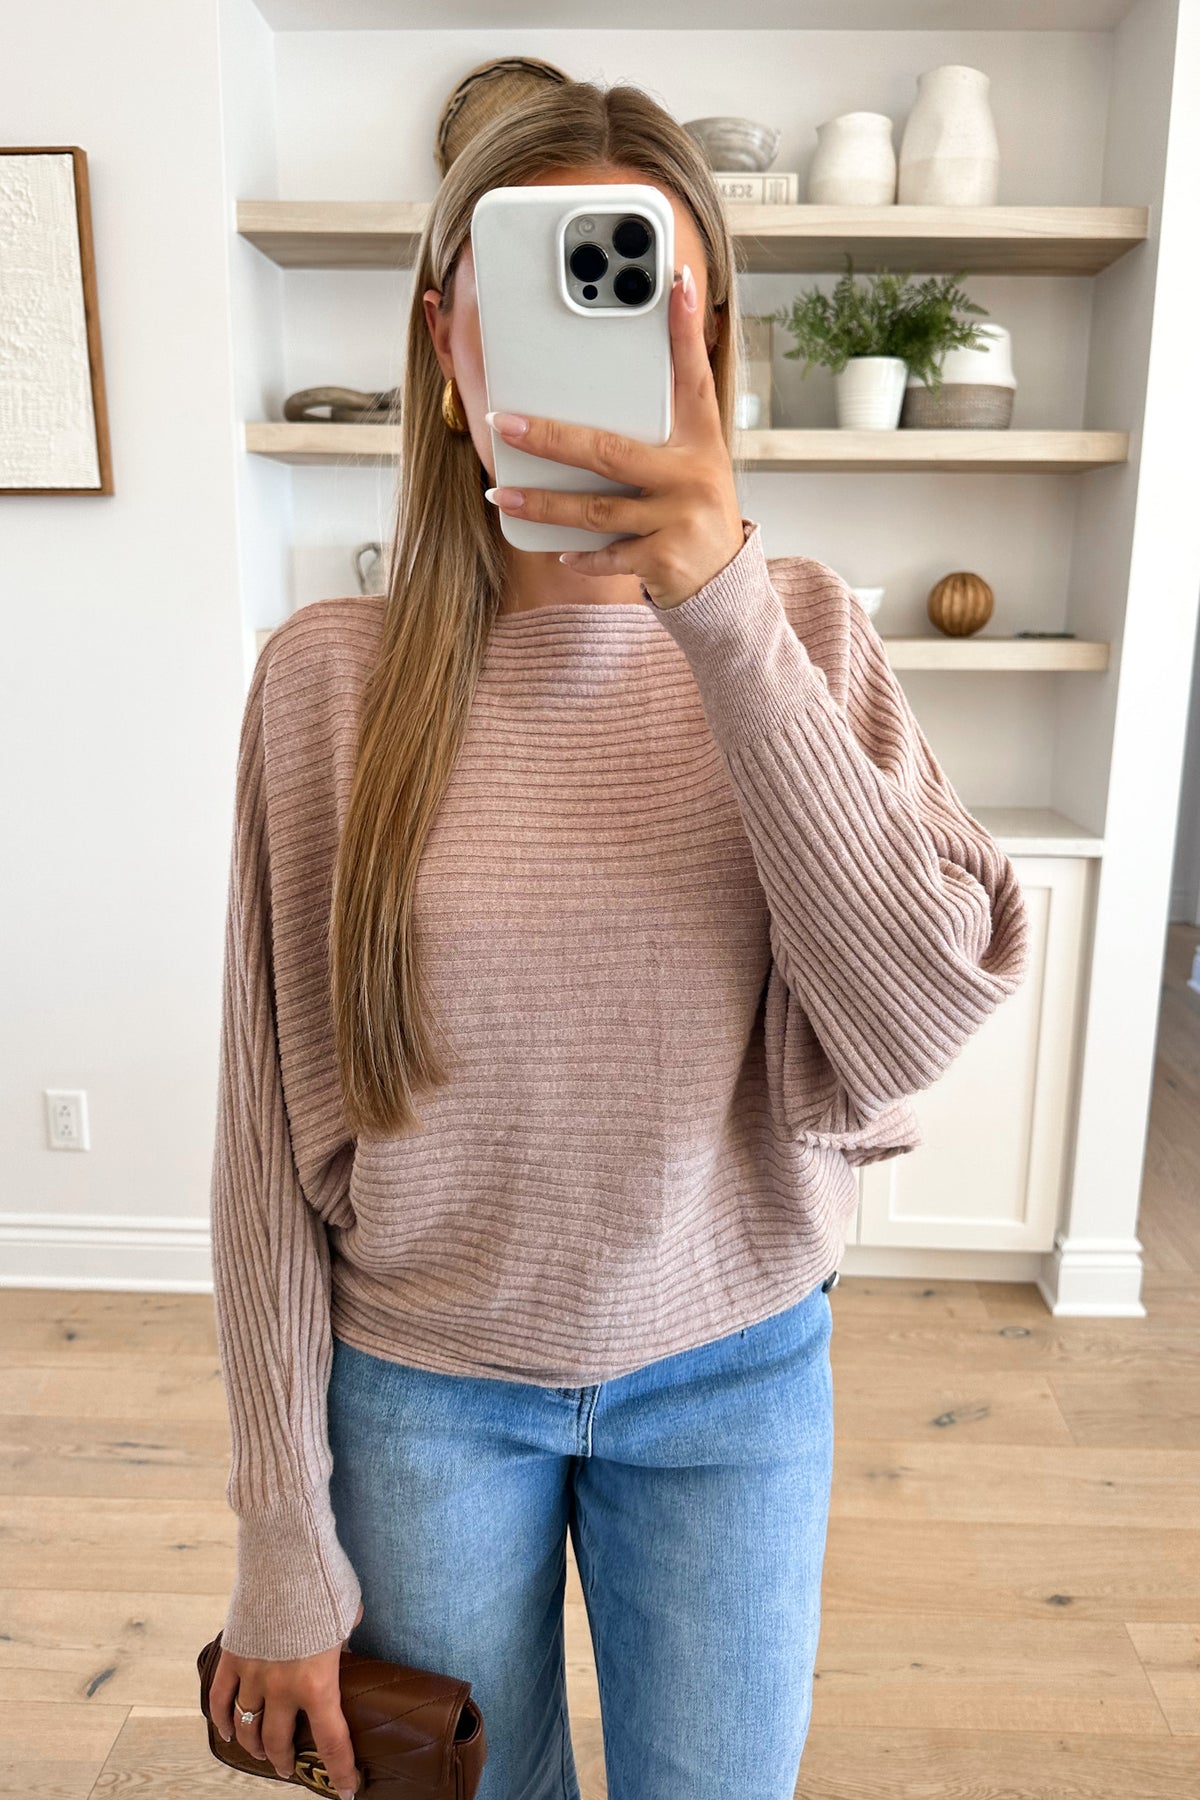 CLO - Taupe Sweater